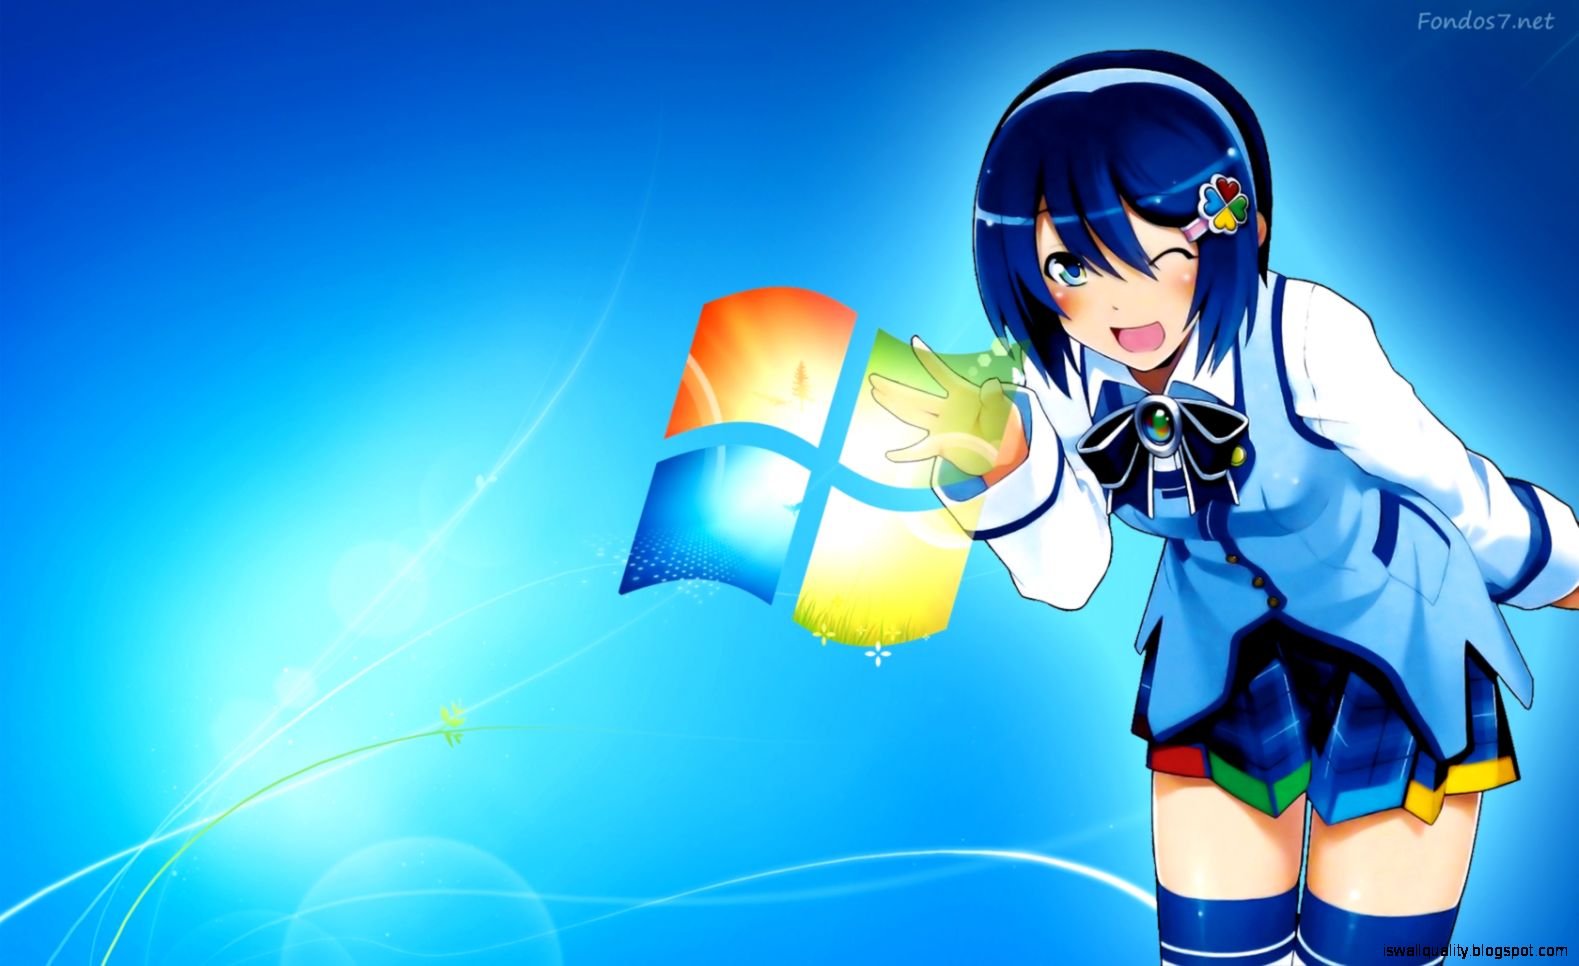 Windows 7 Anime Wallpaper Wallpapers | Wallpapers Quality